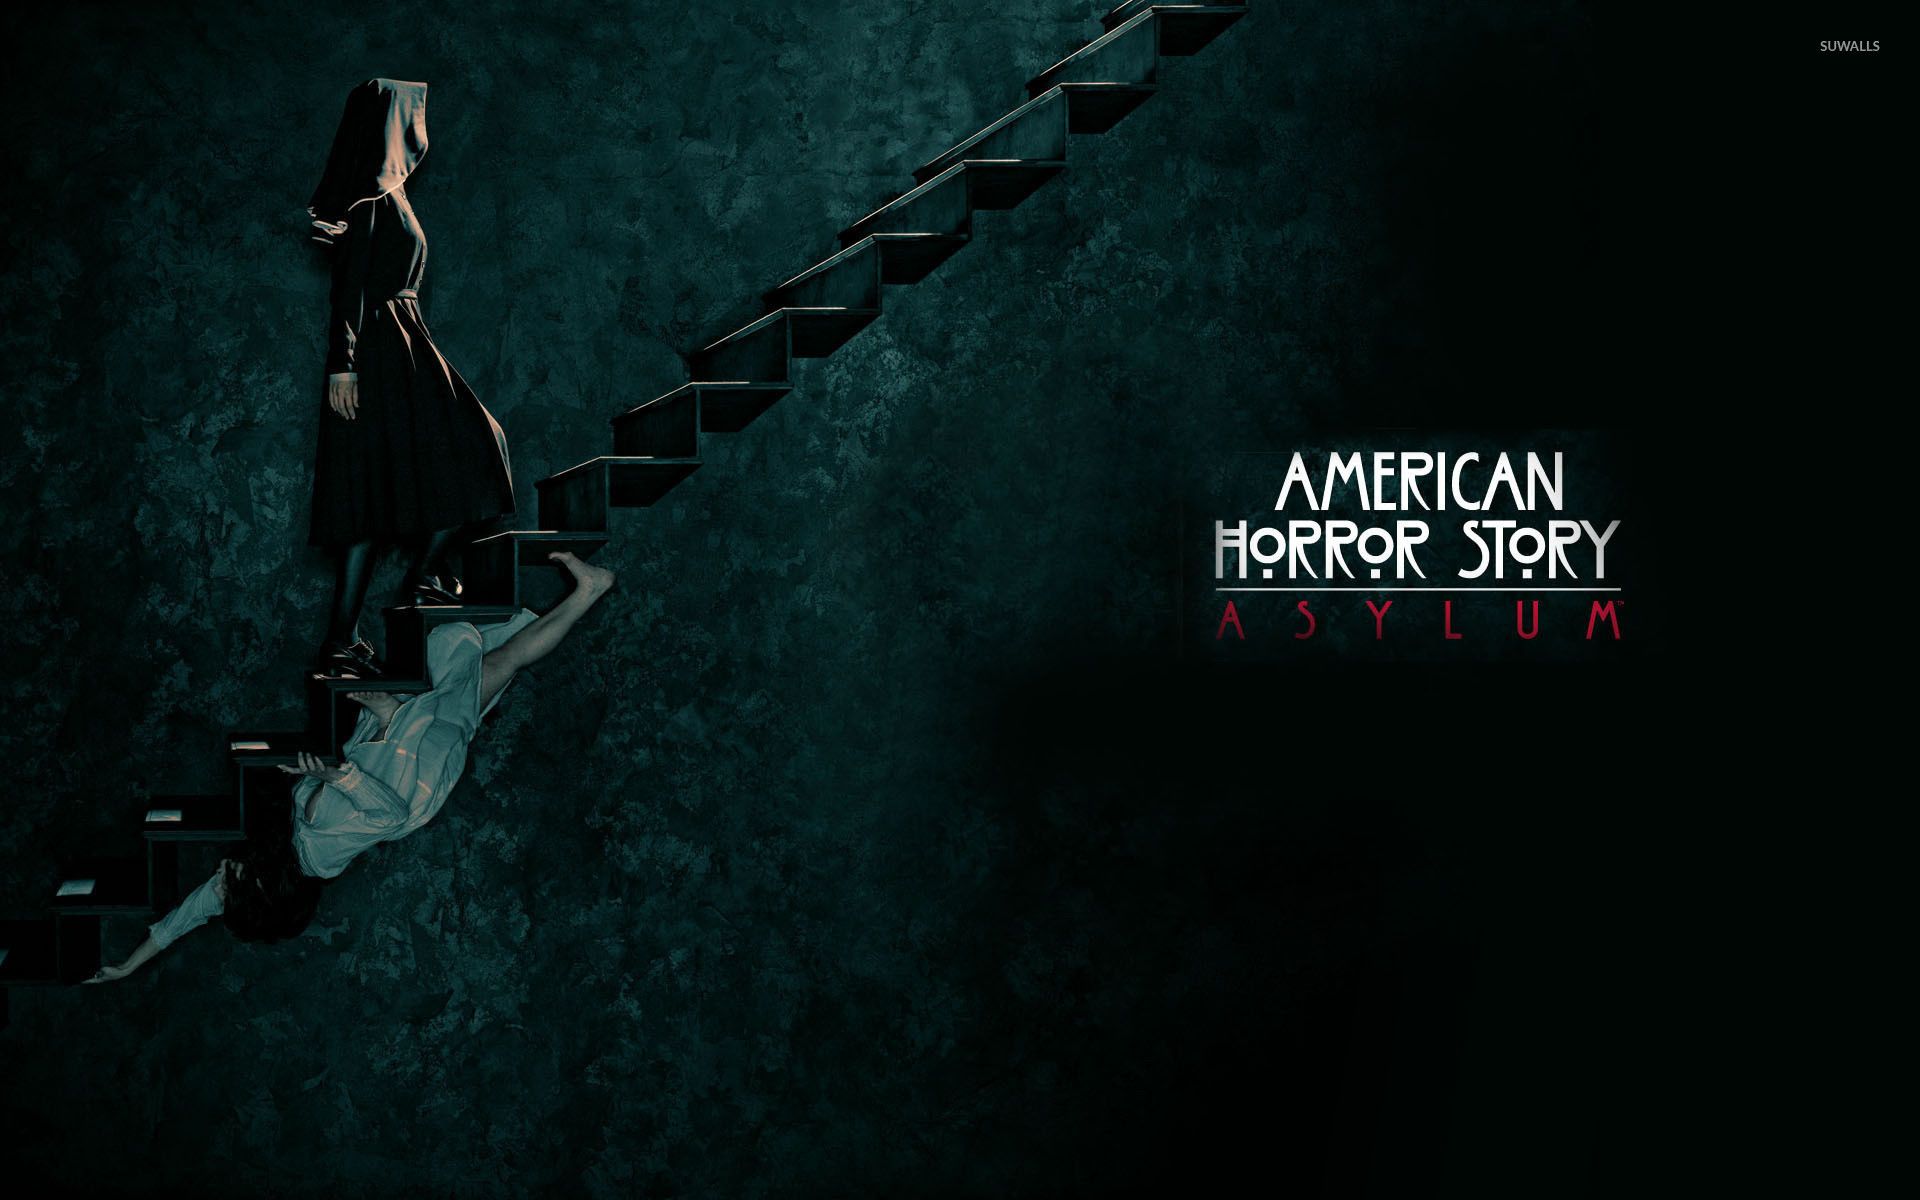 American Horror Story Wallpaper background picture